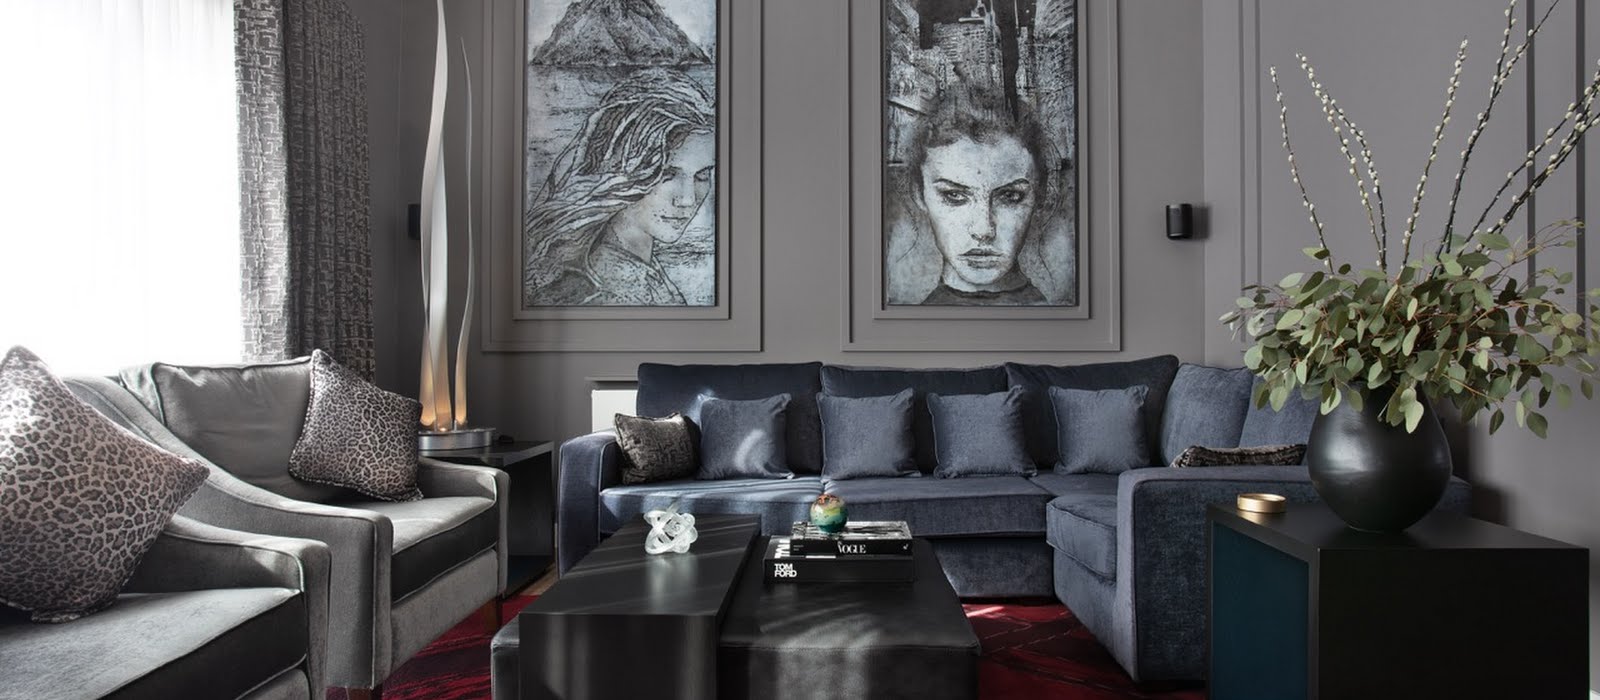 This Enniskerry home is full of opulent, moody glamour